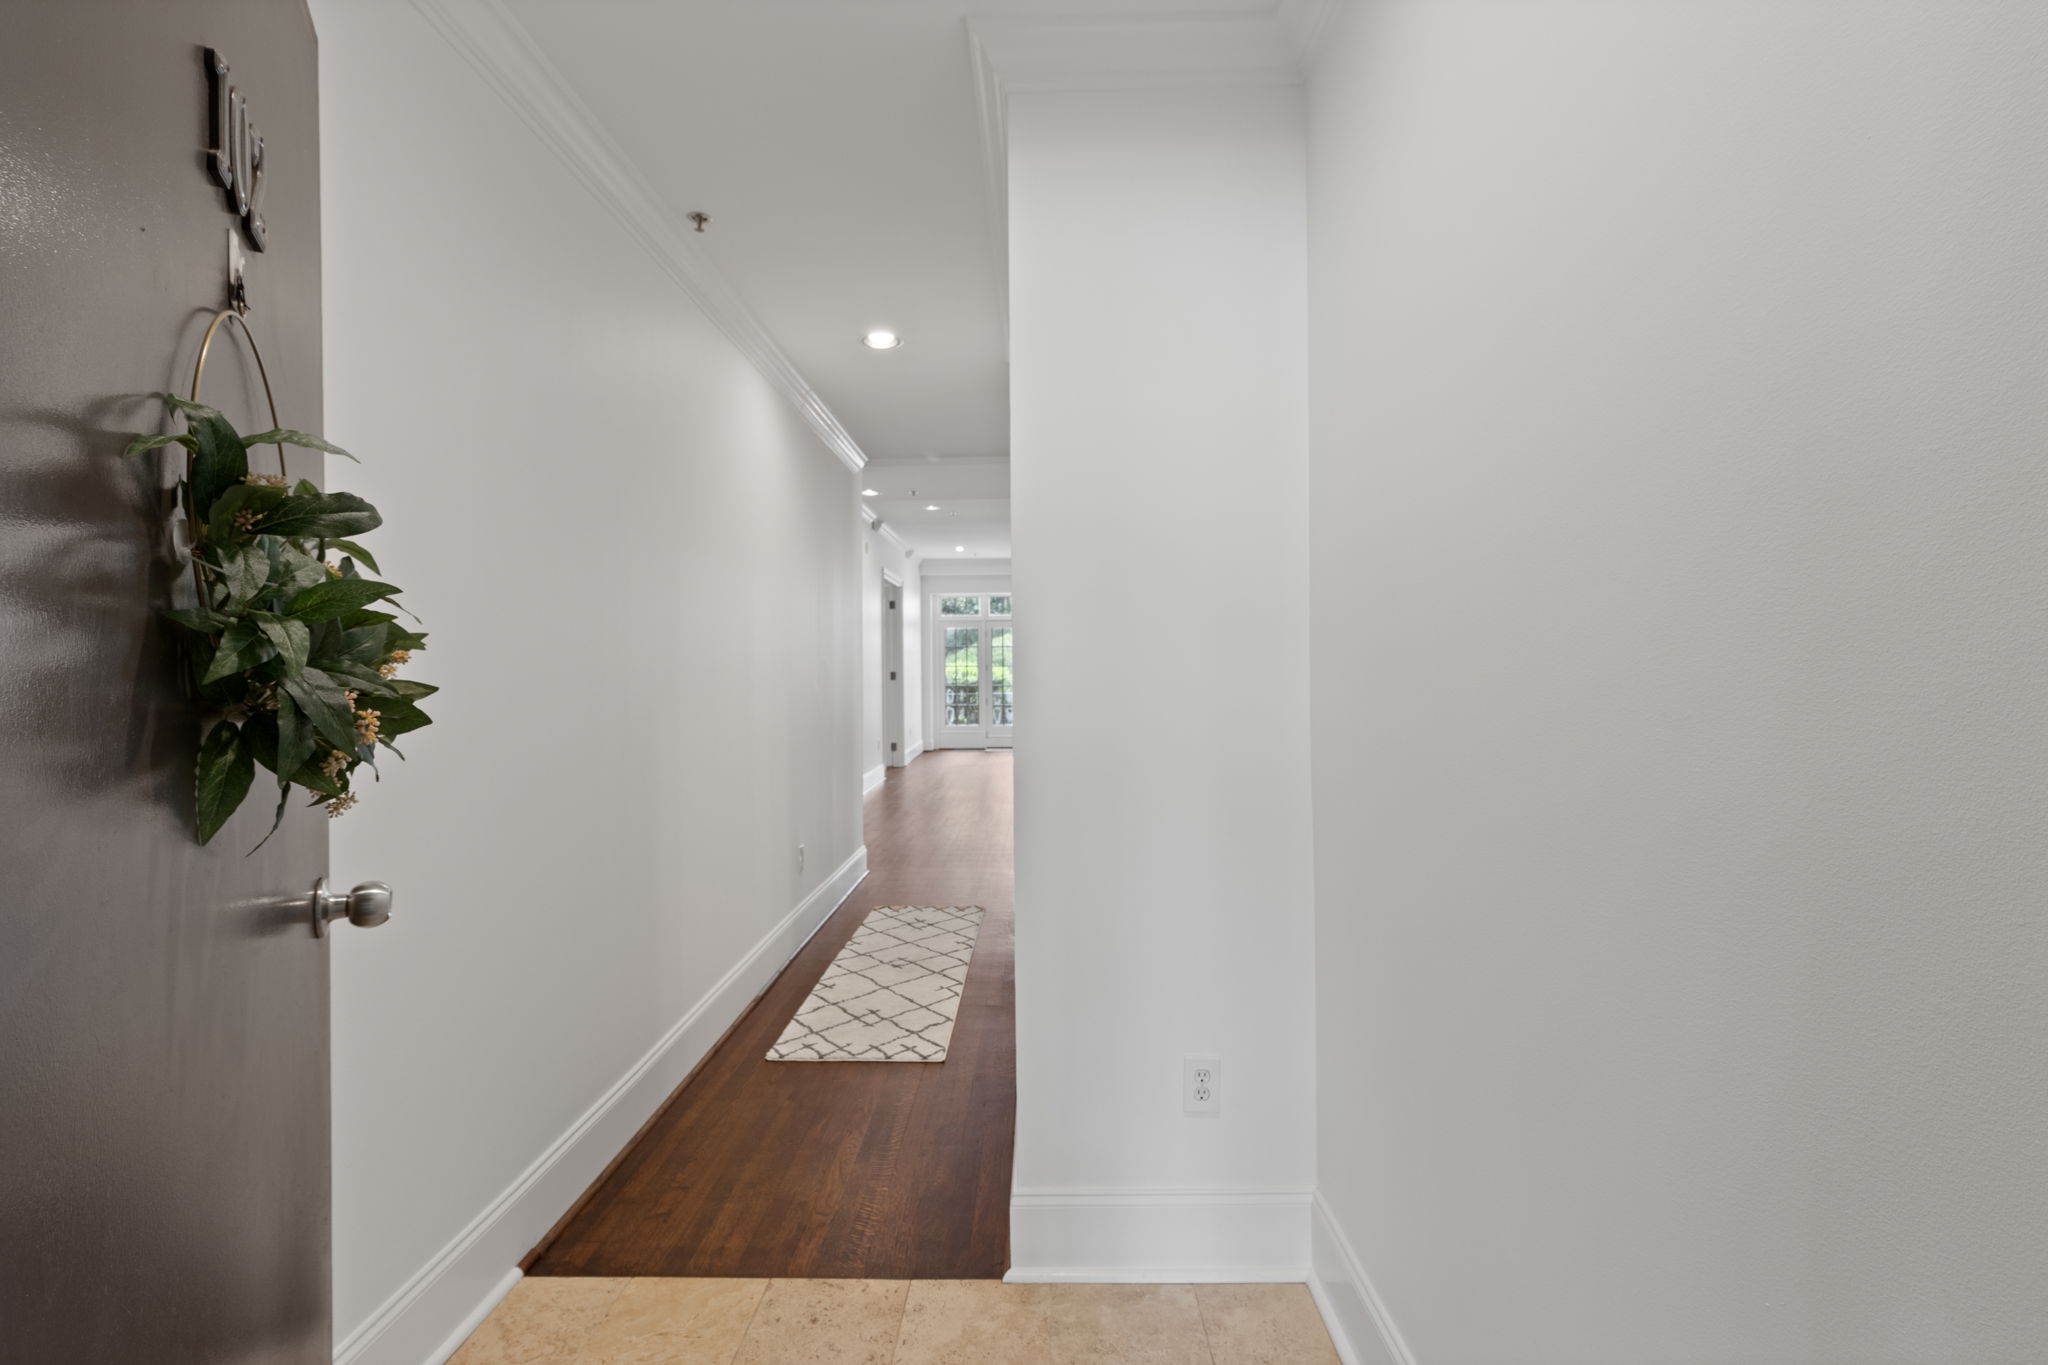 The entry foyer and hallway welcome you home to newly refinished hardwood floors and freshly painted rooms throughout